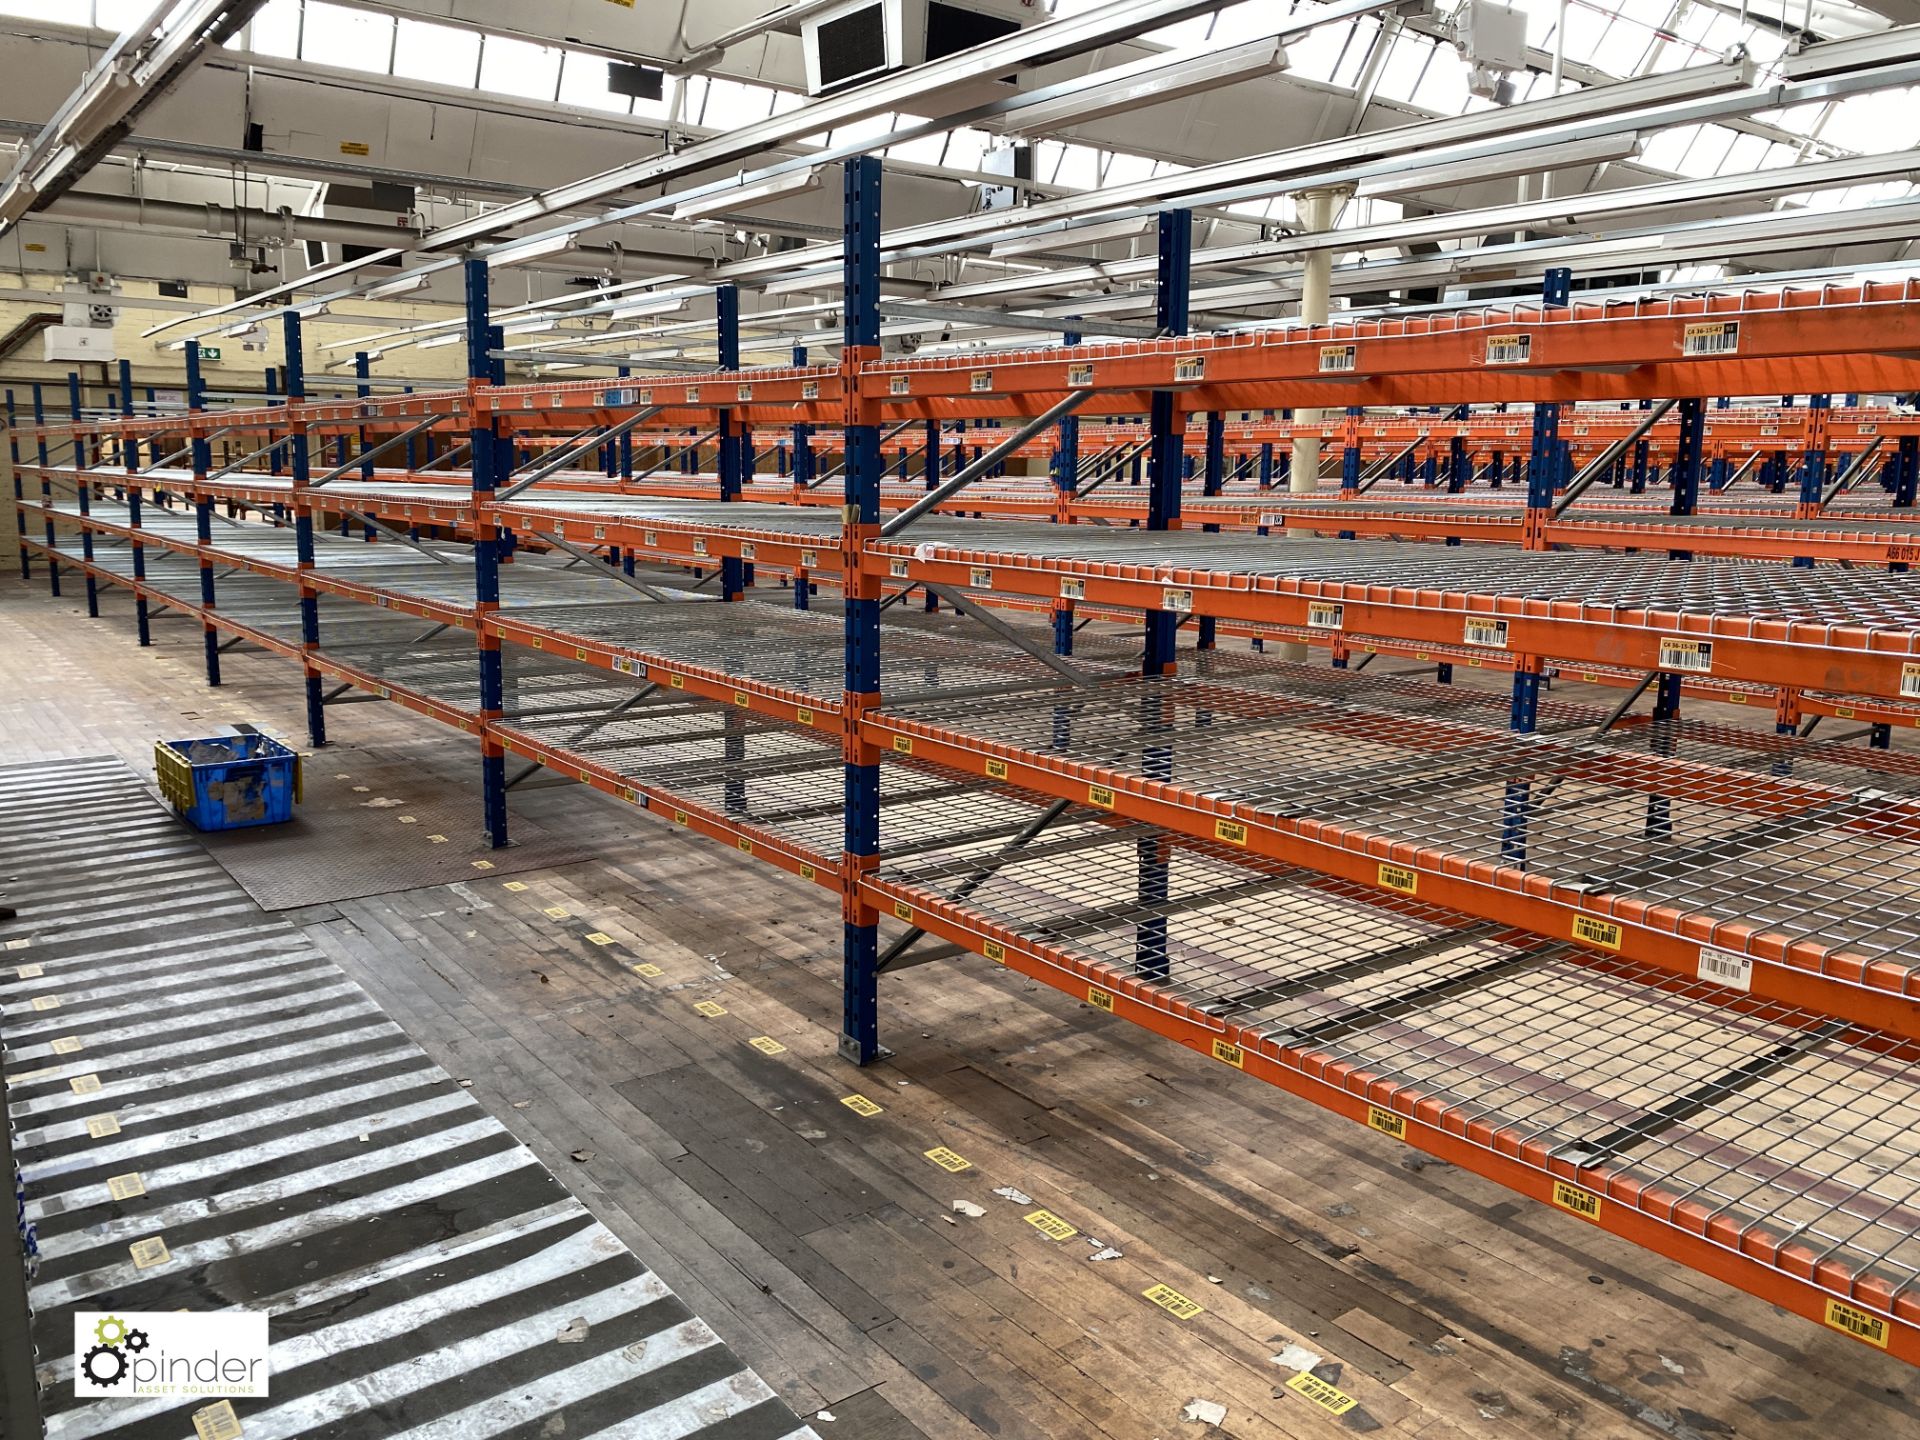 8 bays PSS 2K85 16 boltless Stock Racking, comprising 9 uprights 2400mm x 1200mm, 64 beams 2700mm, - Image 4 of 5